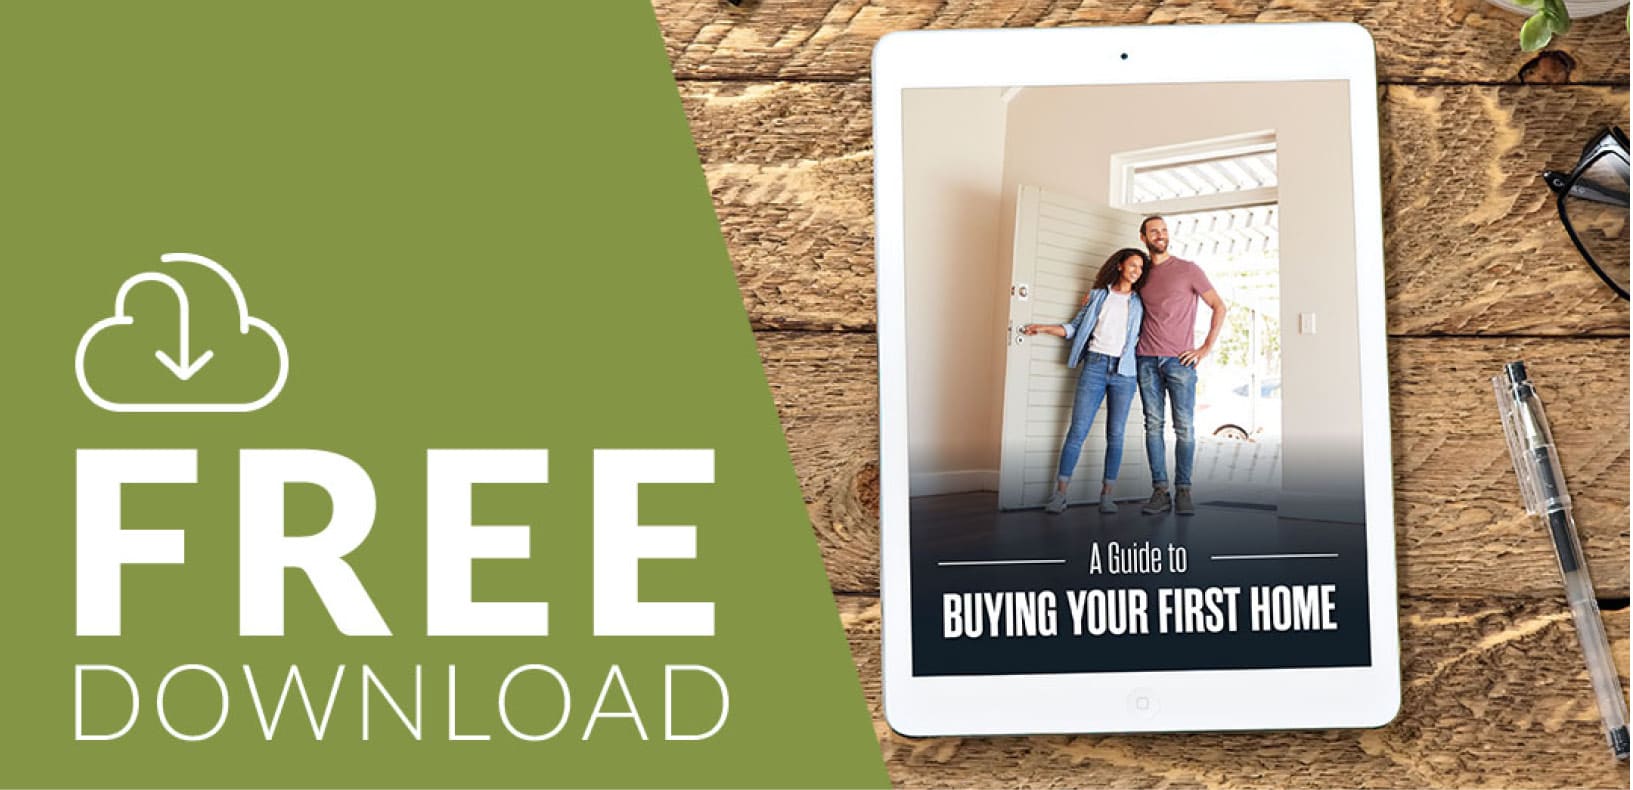 Free download of a free e-book titled a guide to buying your first home.